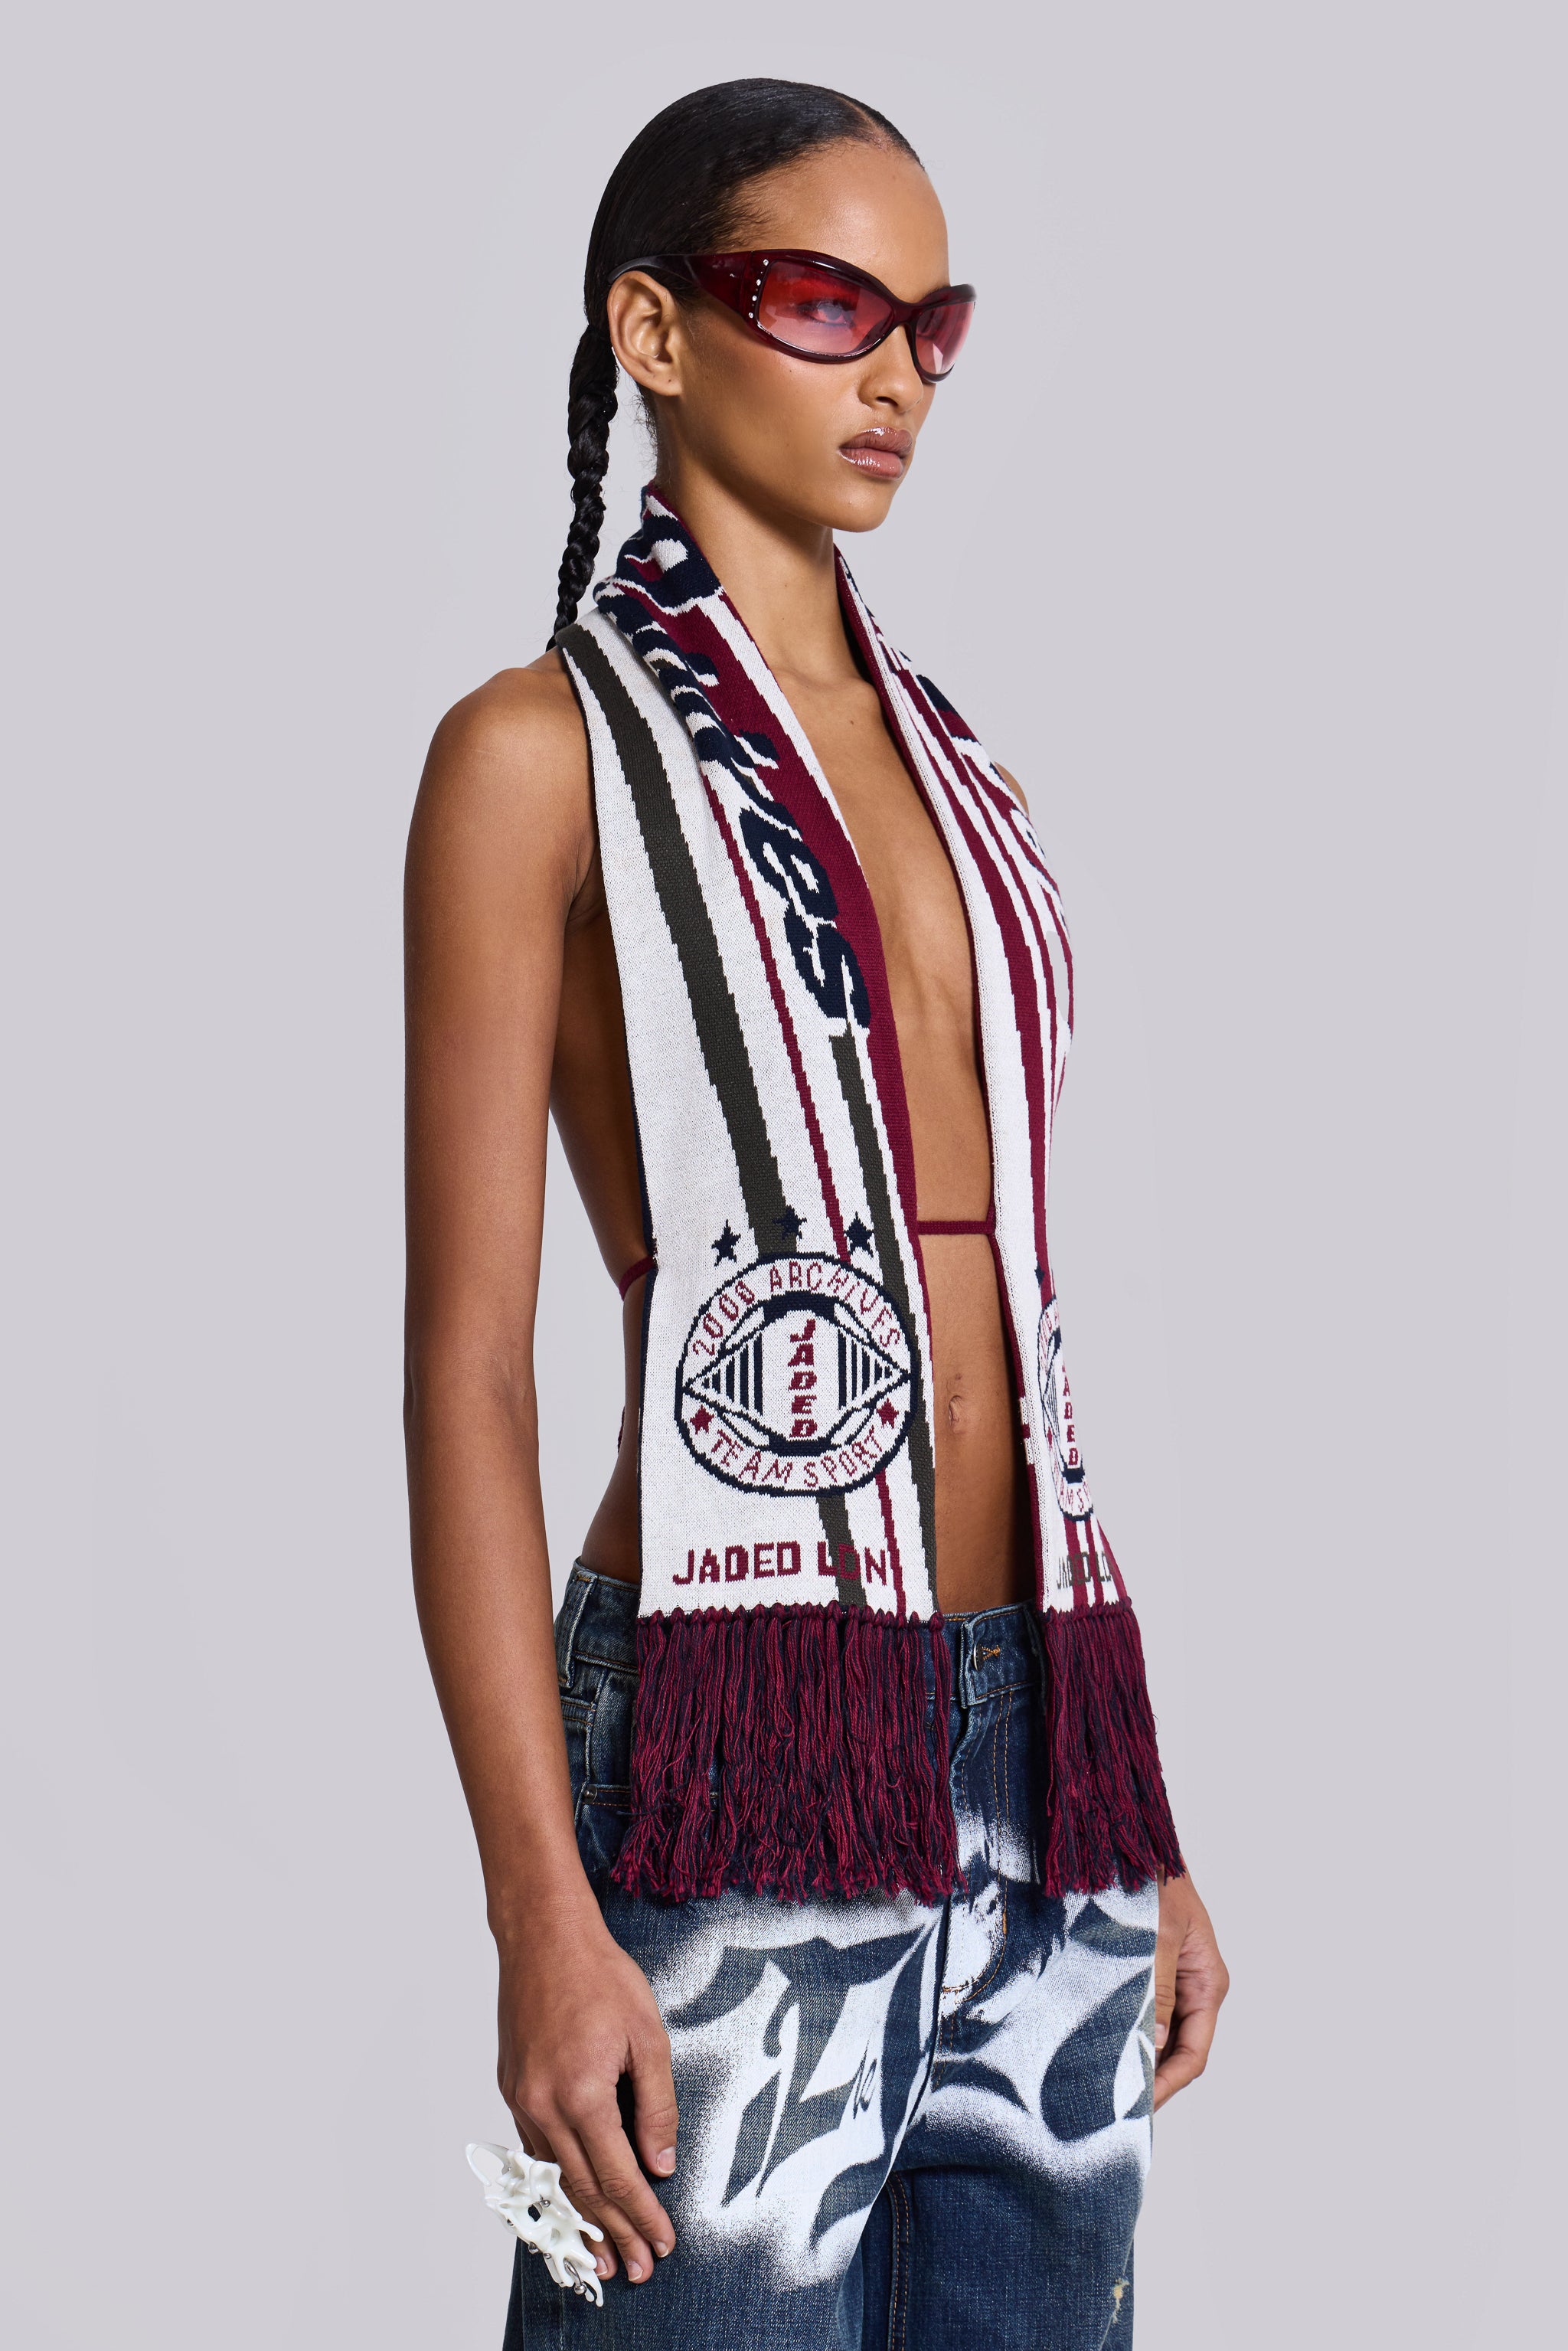 Jaded London Merch 3-in-1 Backless Football Scarf Top